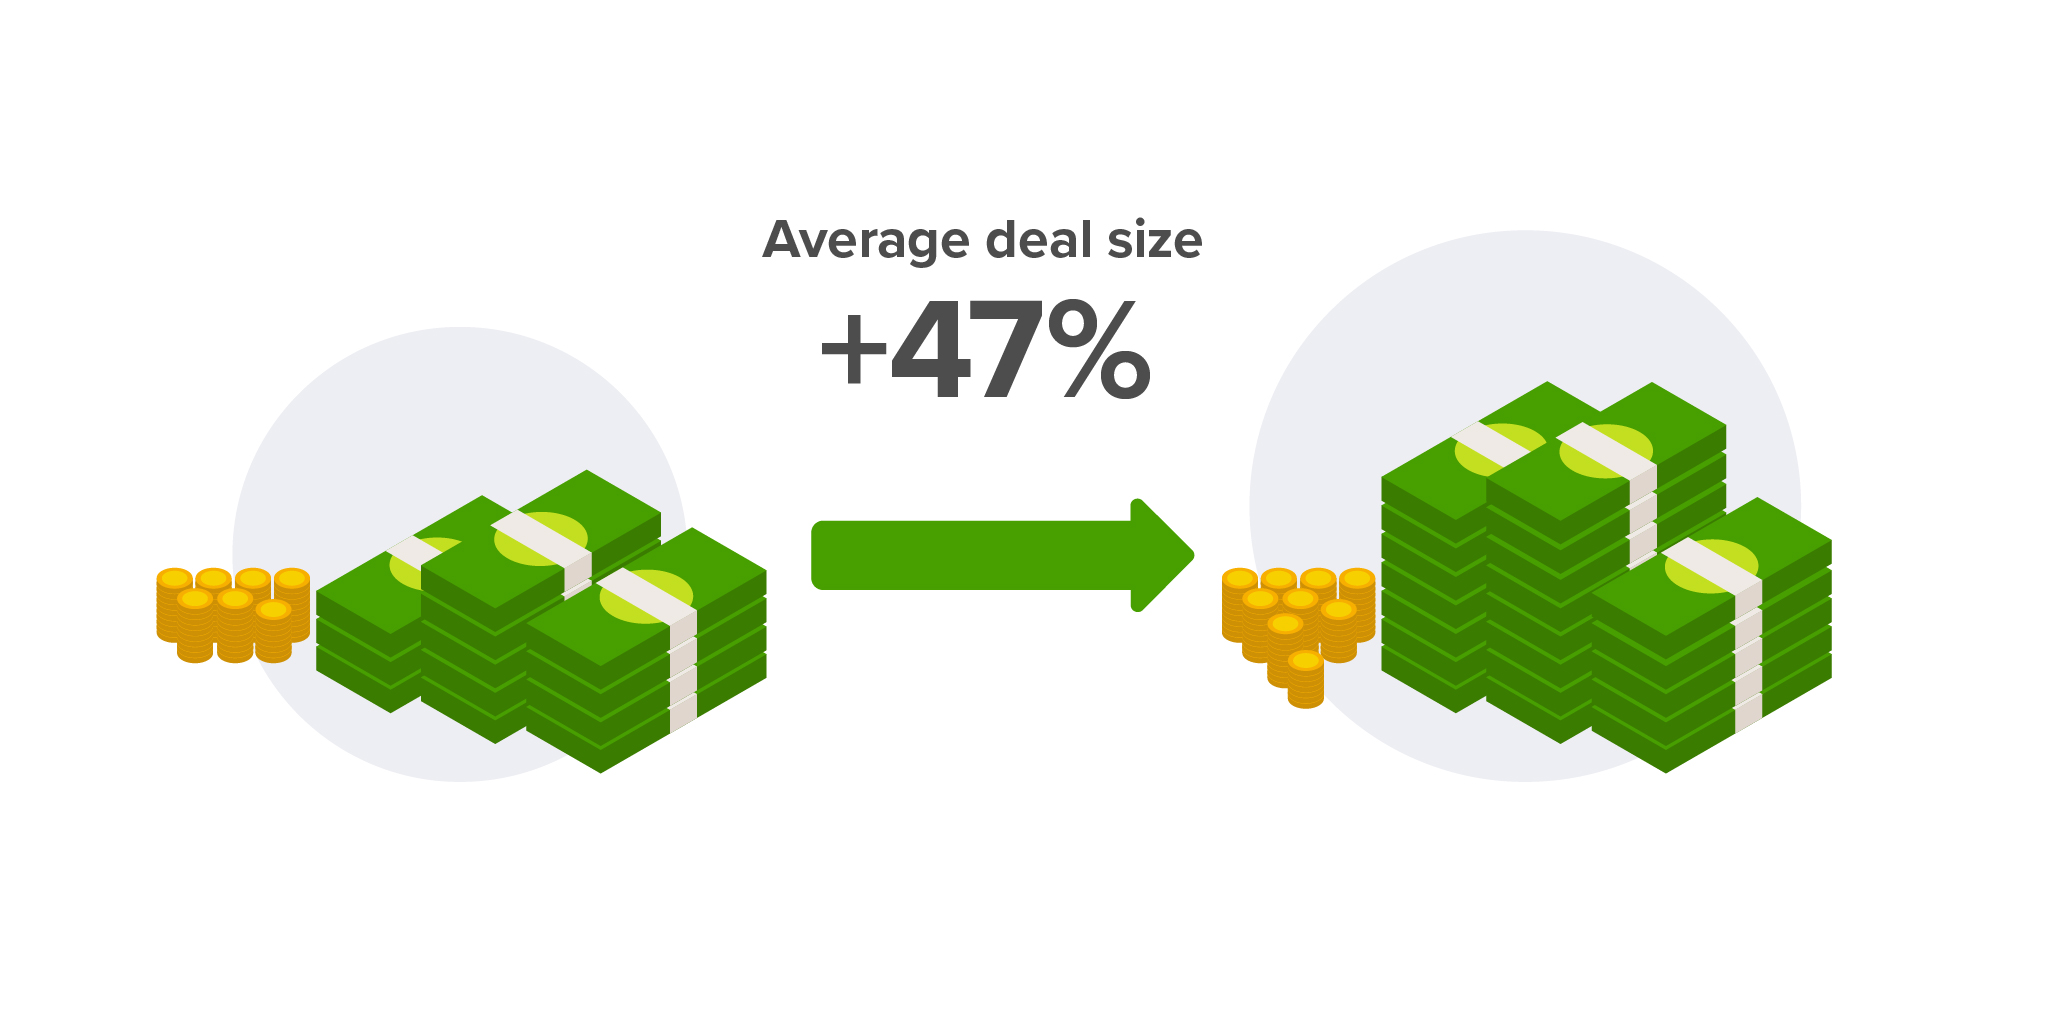 Increase in average deal size